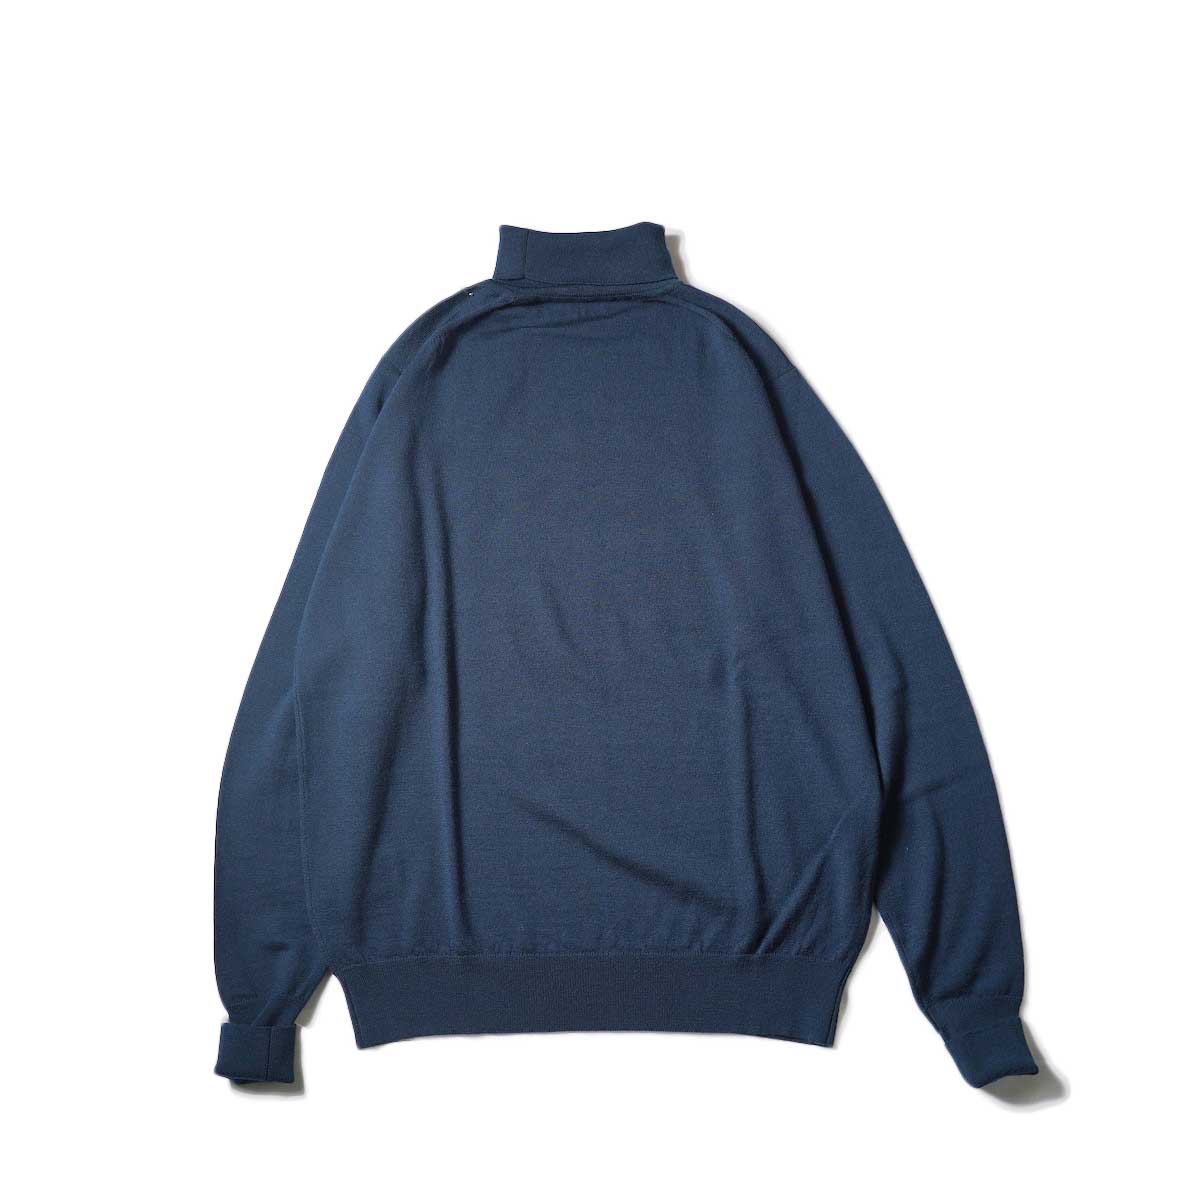 JOHN SMEDLEY / A4588 PULLOVER RC LS (Orion Green)背面